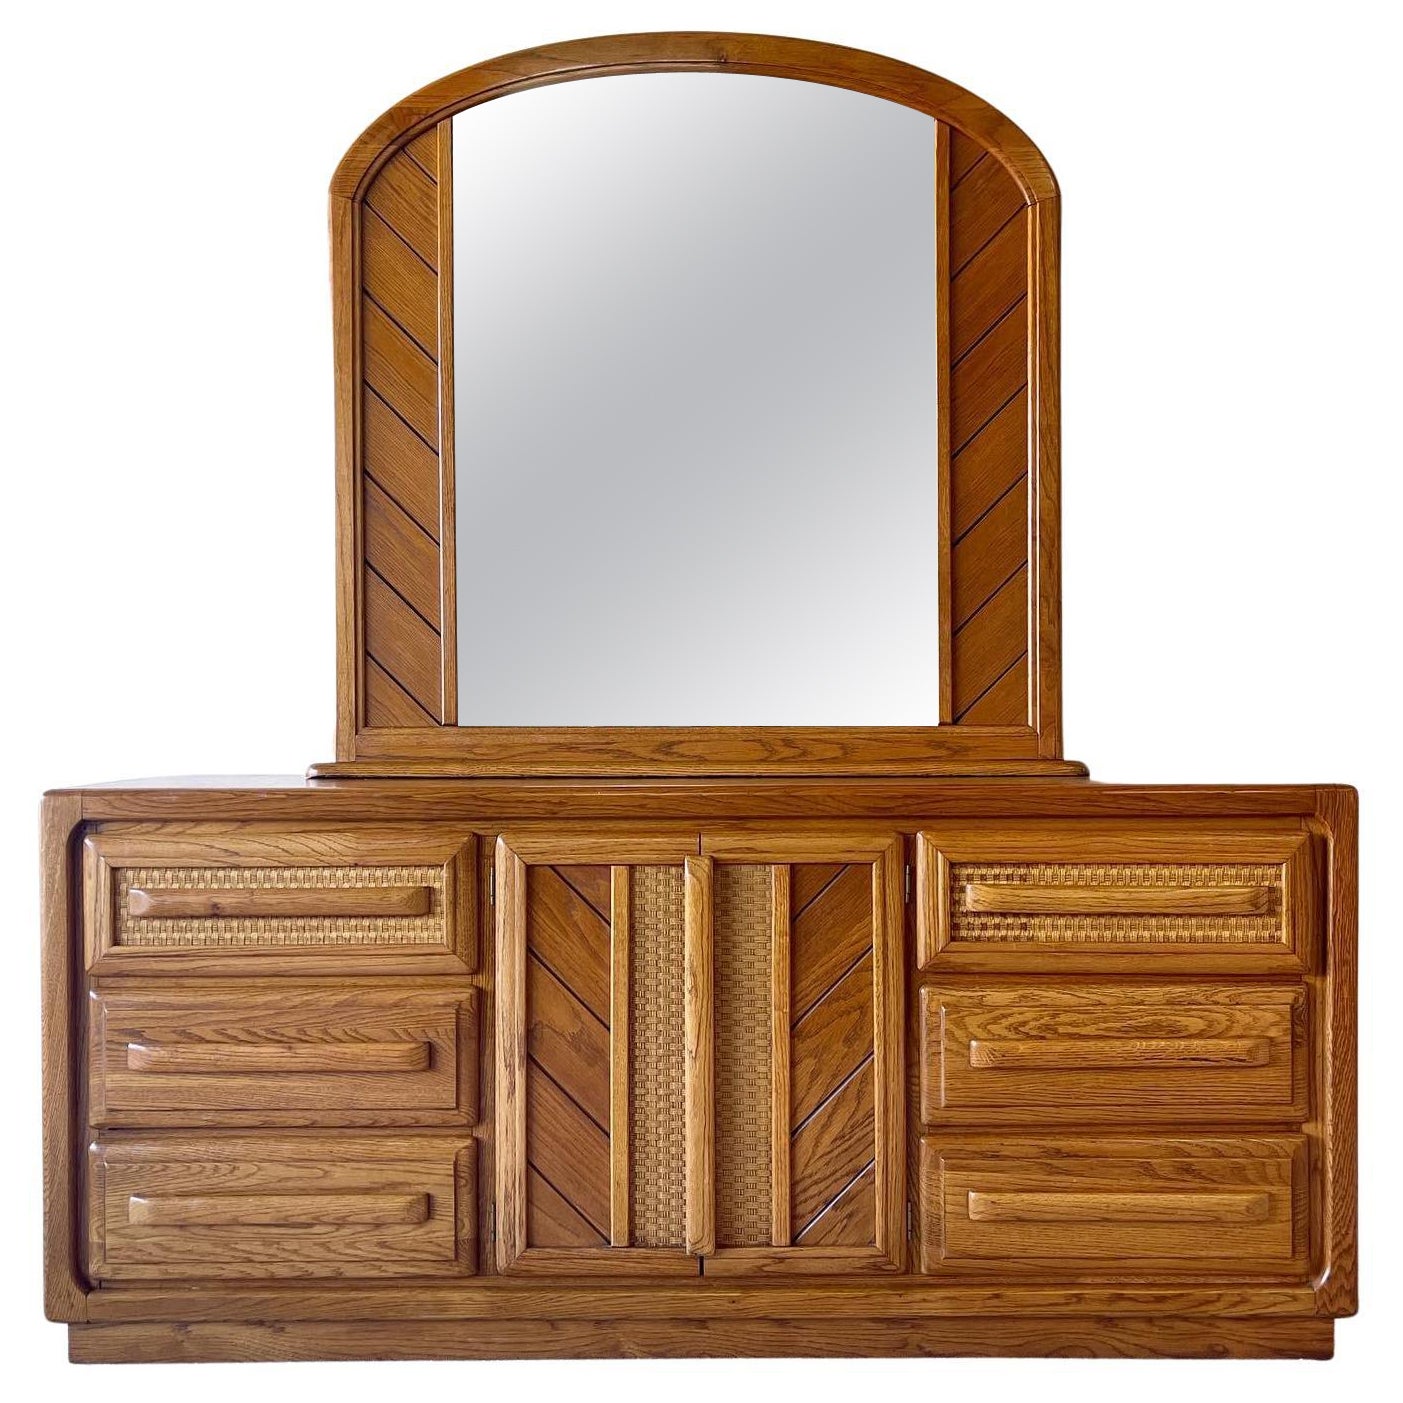 Raliegh Road Oak and Wicker Paneled Dresser with Mirror, 9 Drawers